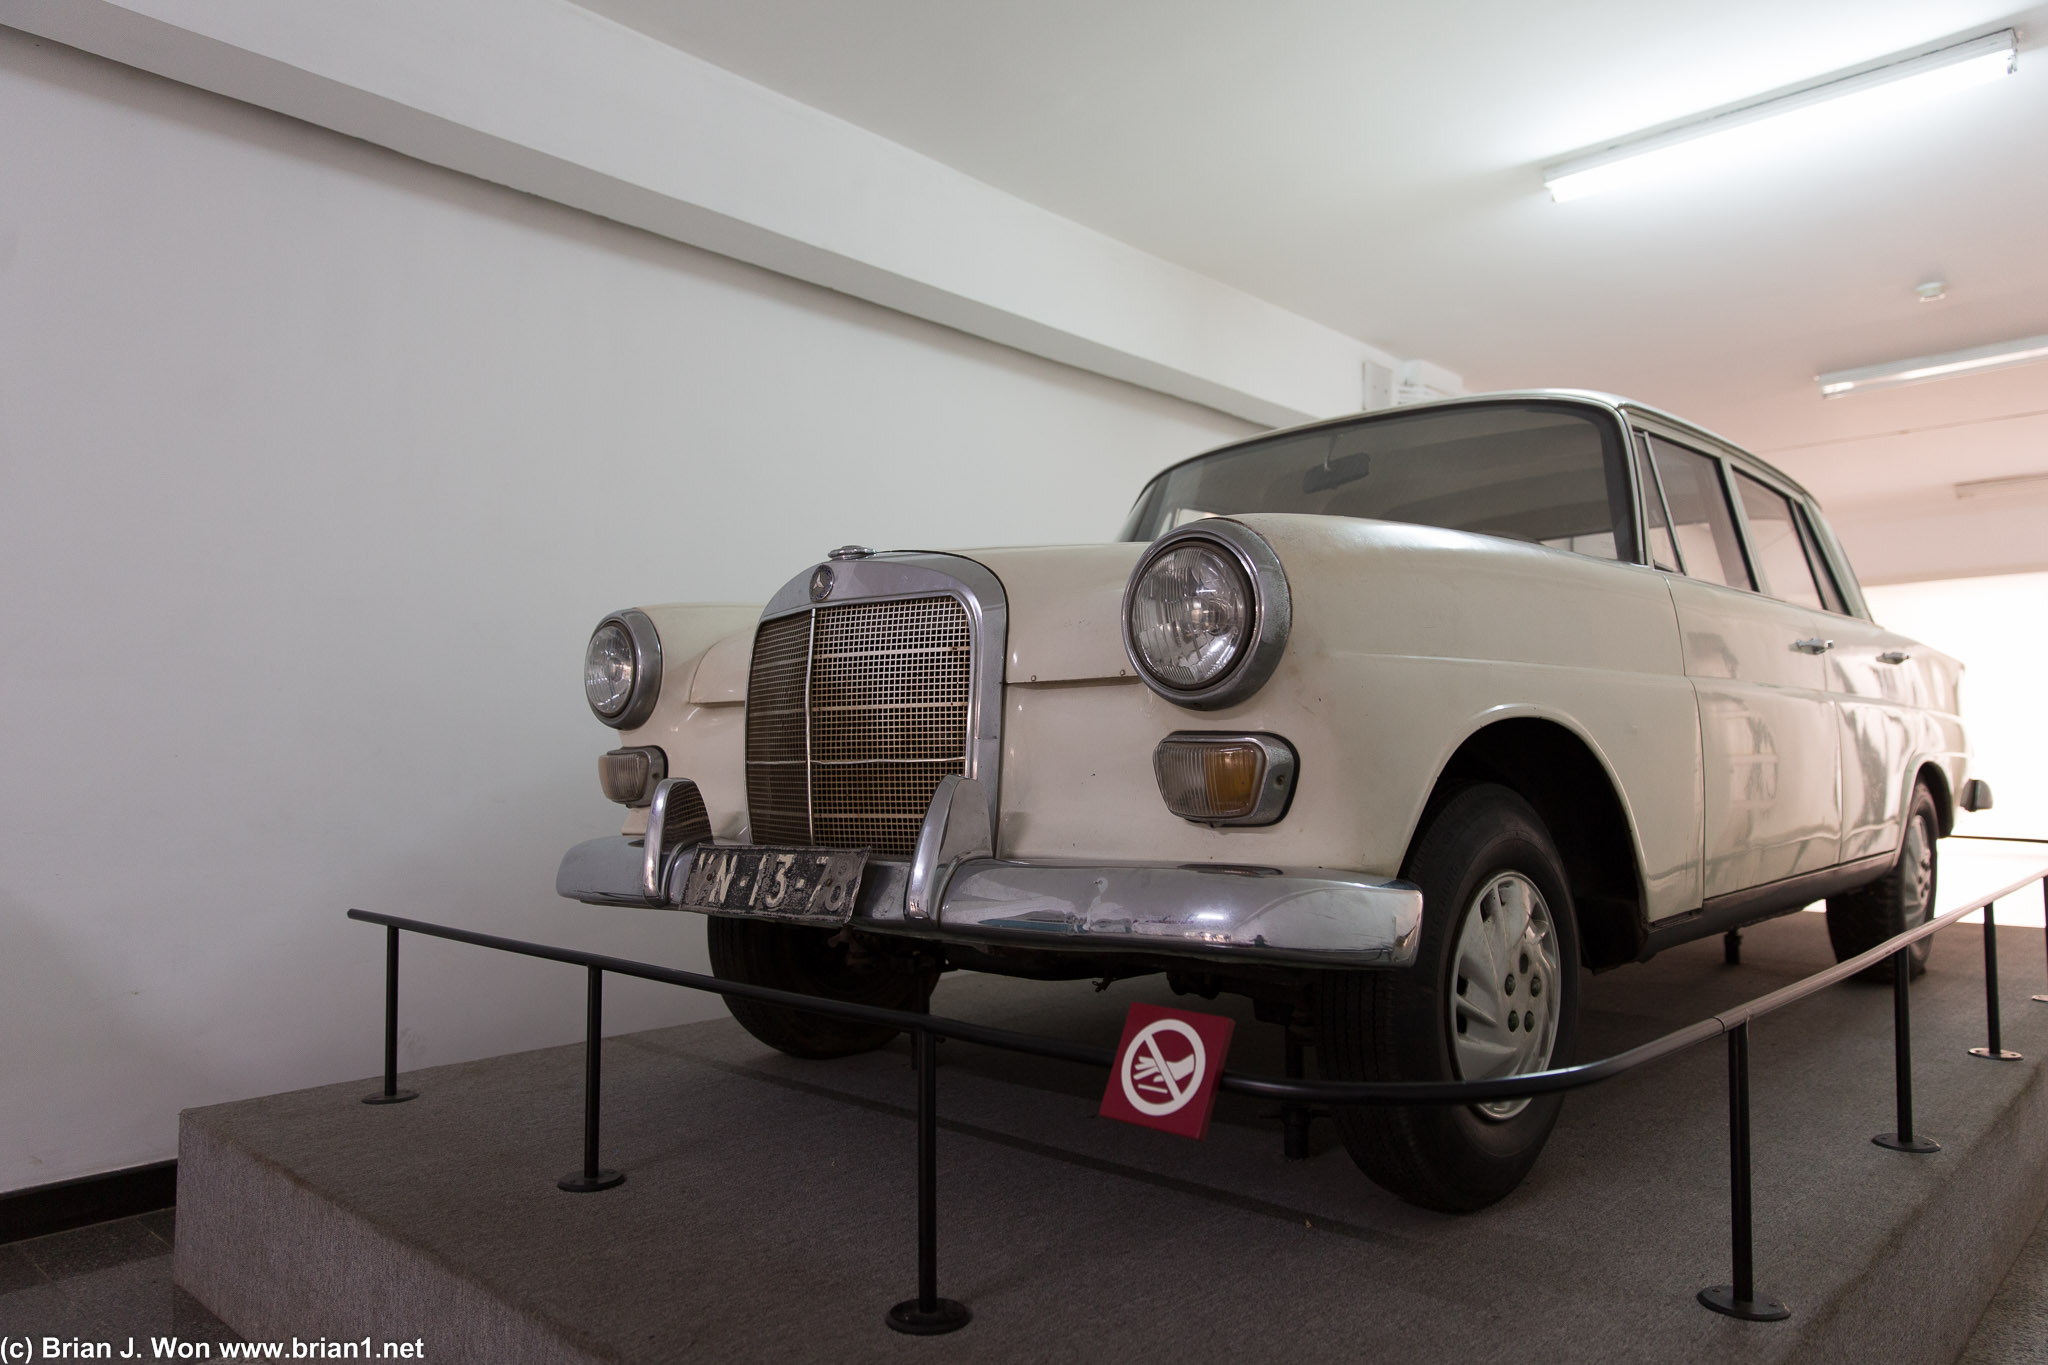 Mercedes 200. Although... those look like awfully modern hubcaps.